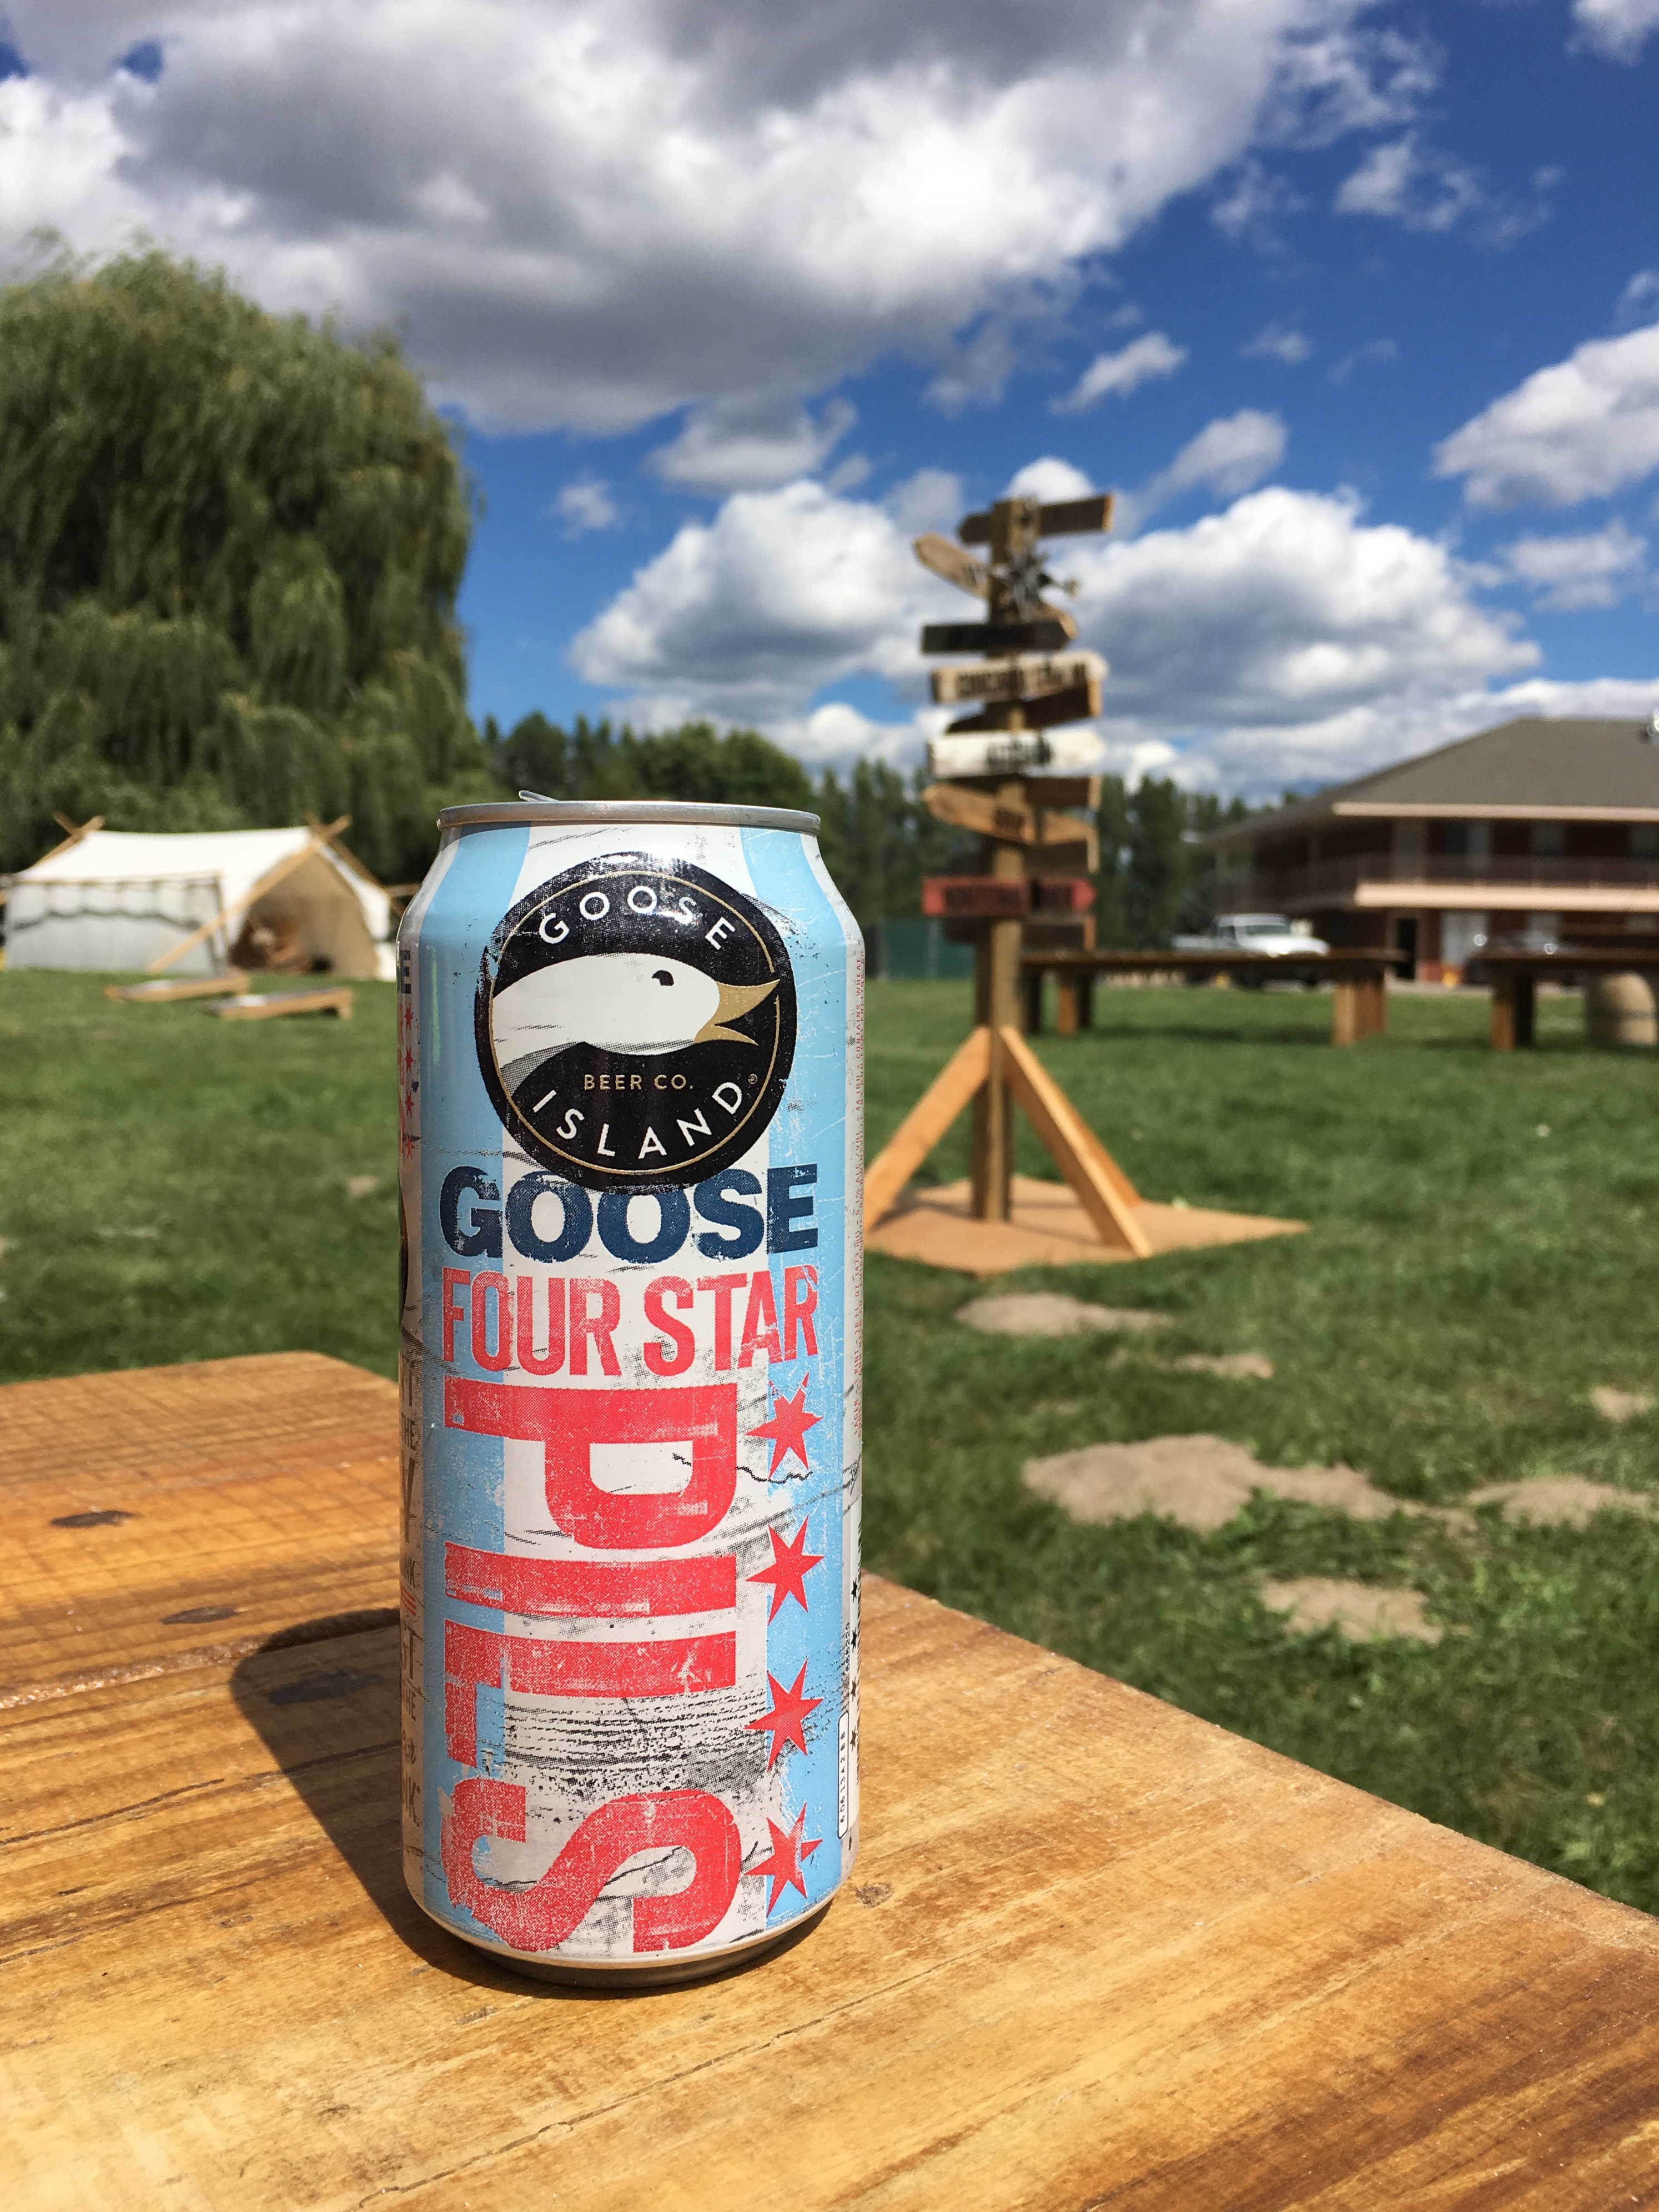 Upon arrival at Elk Mountain Farms we grabbed a tallboy of Goose Island Four Star Pils. The four stars refer to the stars on the Chicago City Flag.